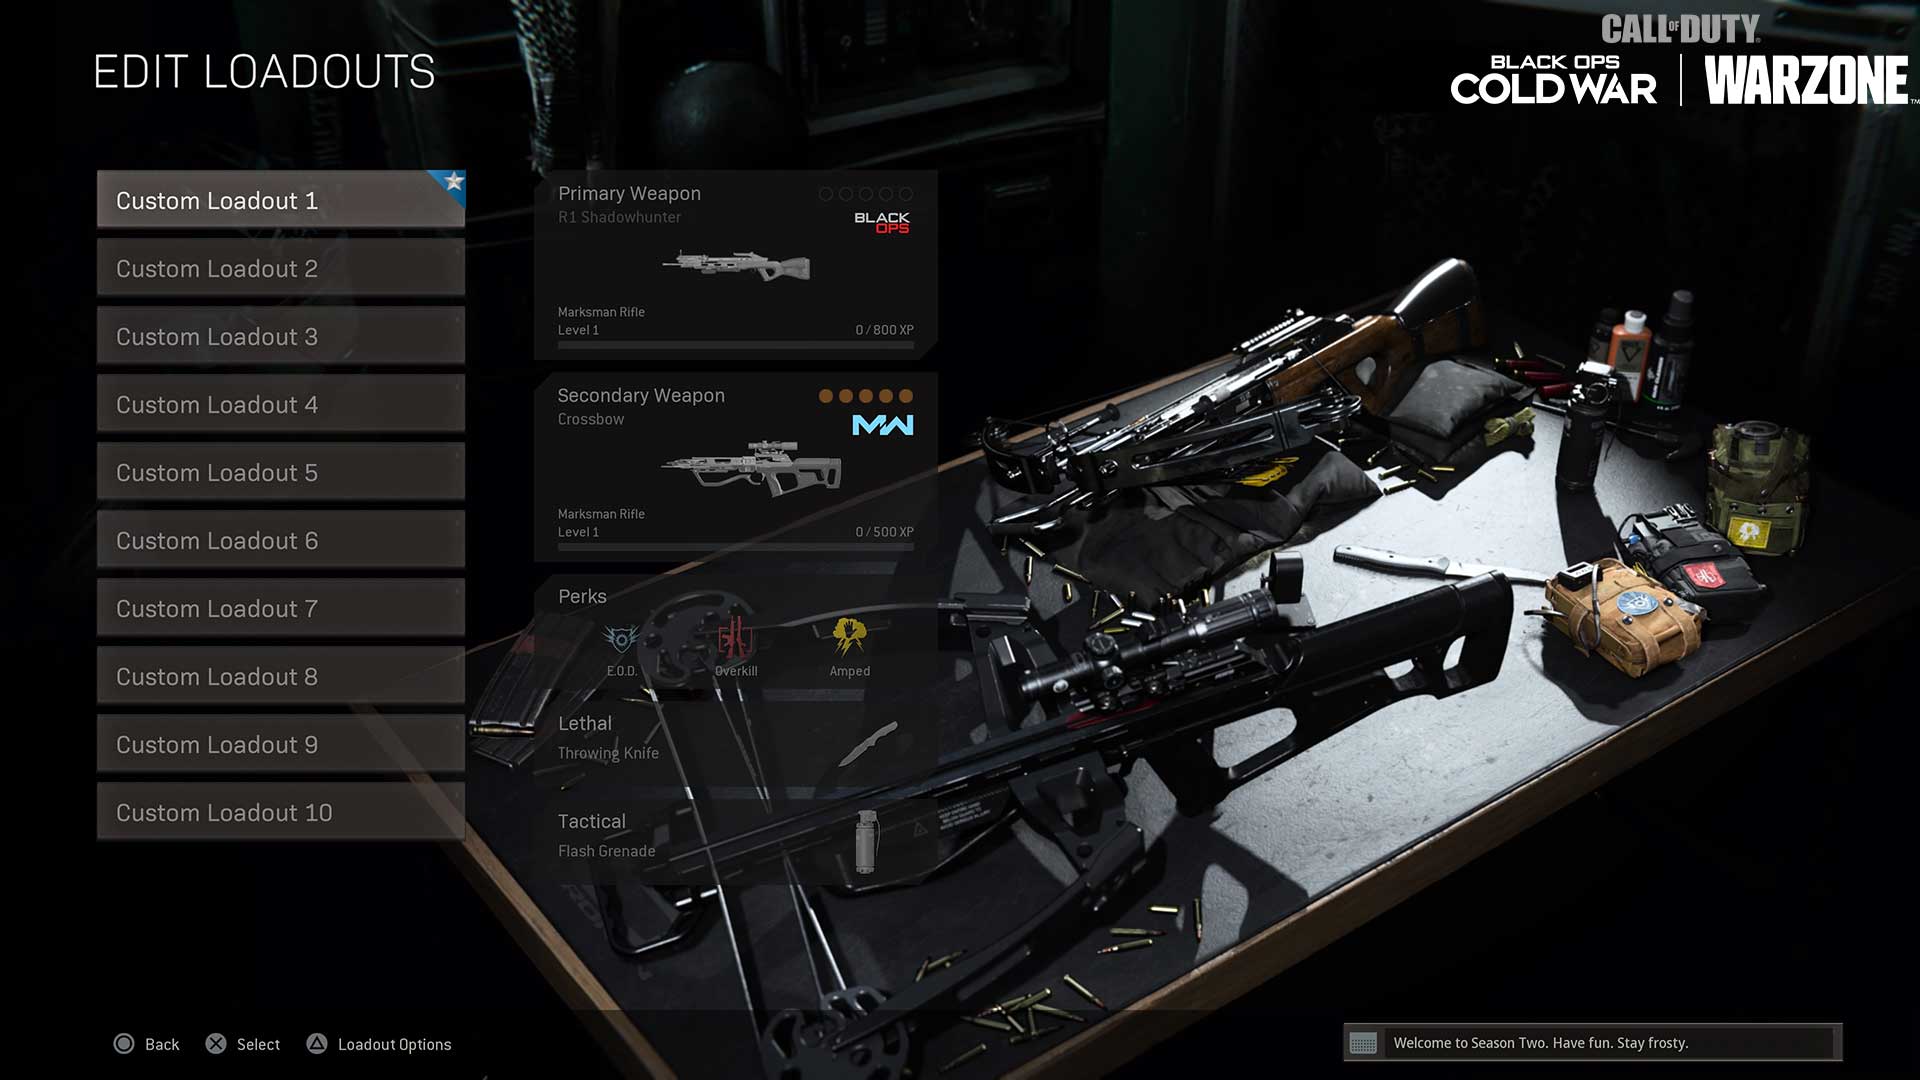 The R1 Shadowhunter How To Unlock And Use Wield The New Crossbow In Call Of Duty Black Ops Cold War And Warzone